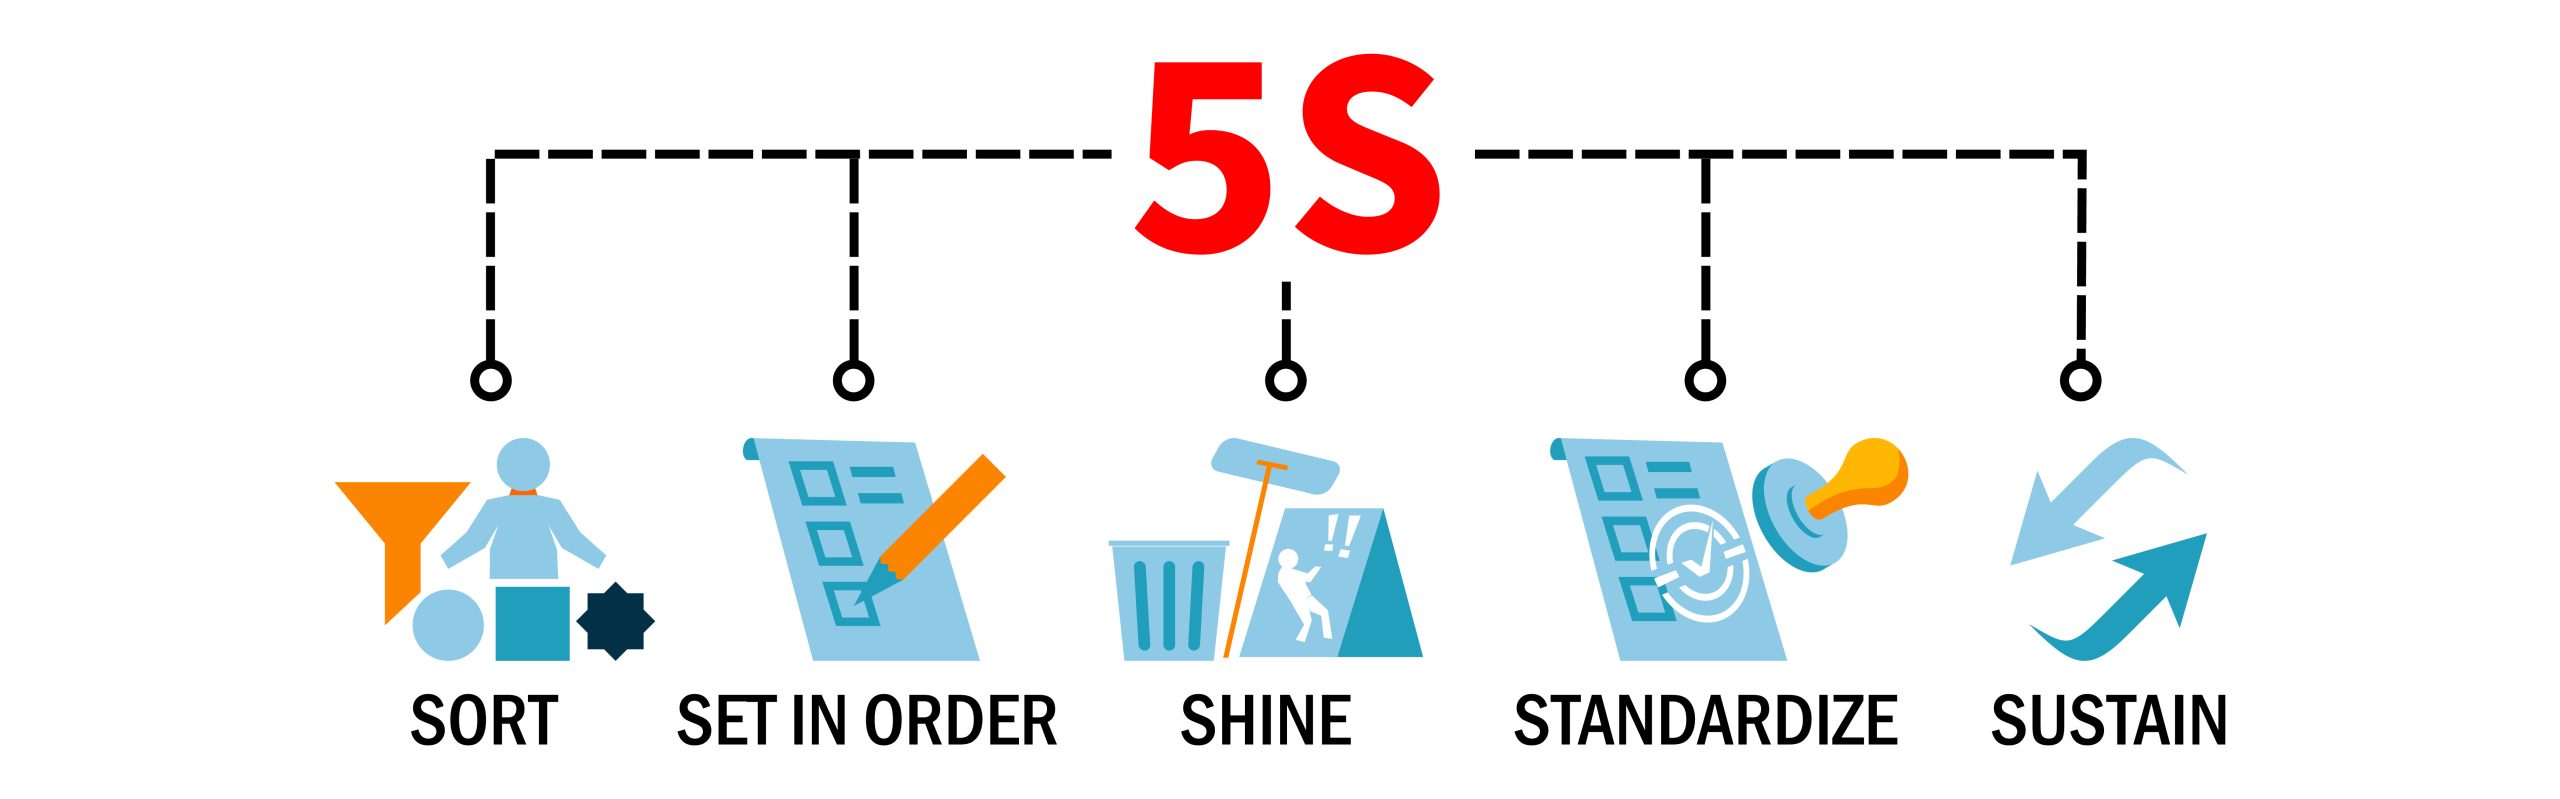 Diagram illustrating the 5s methodology for workplace organization: sort, set in order, shine, standardize, and sustain.